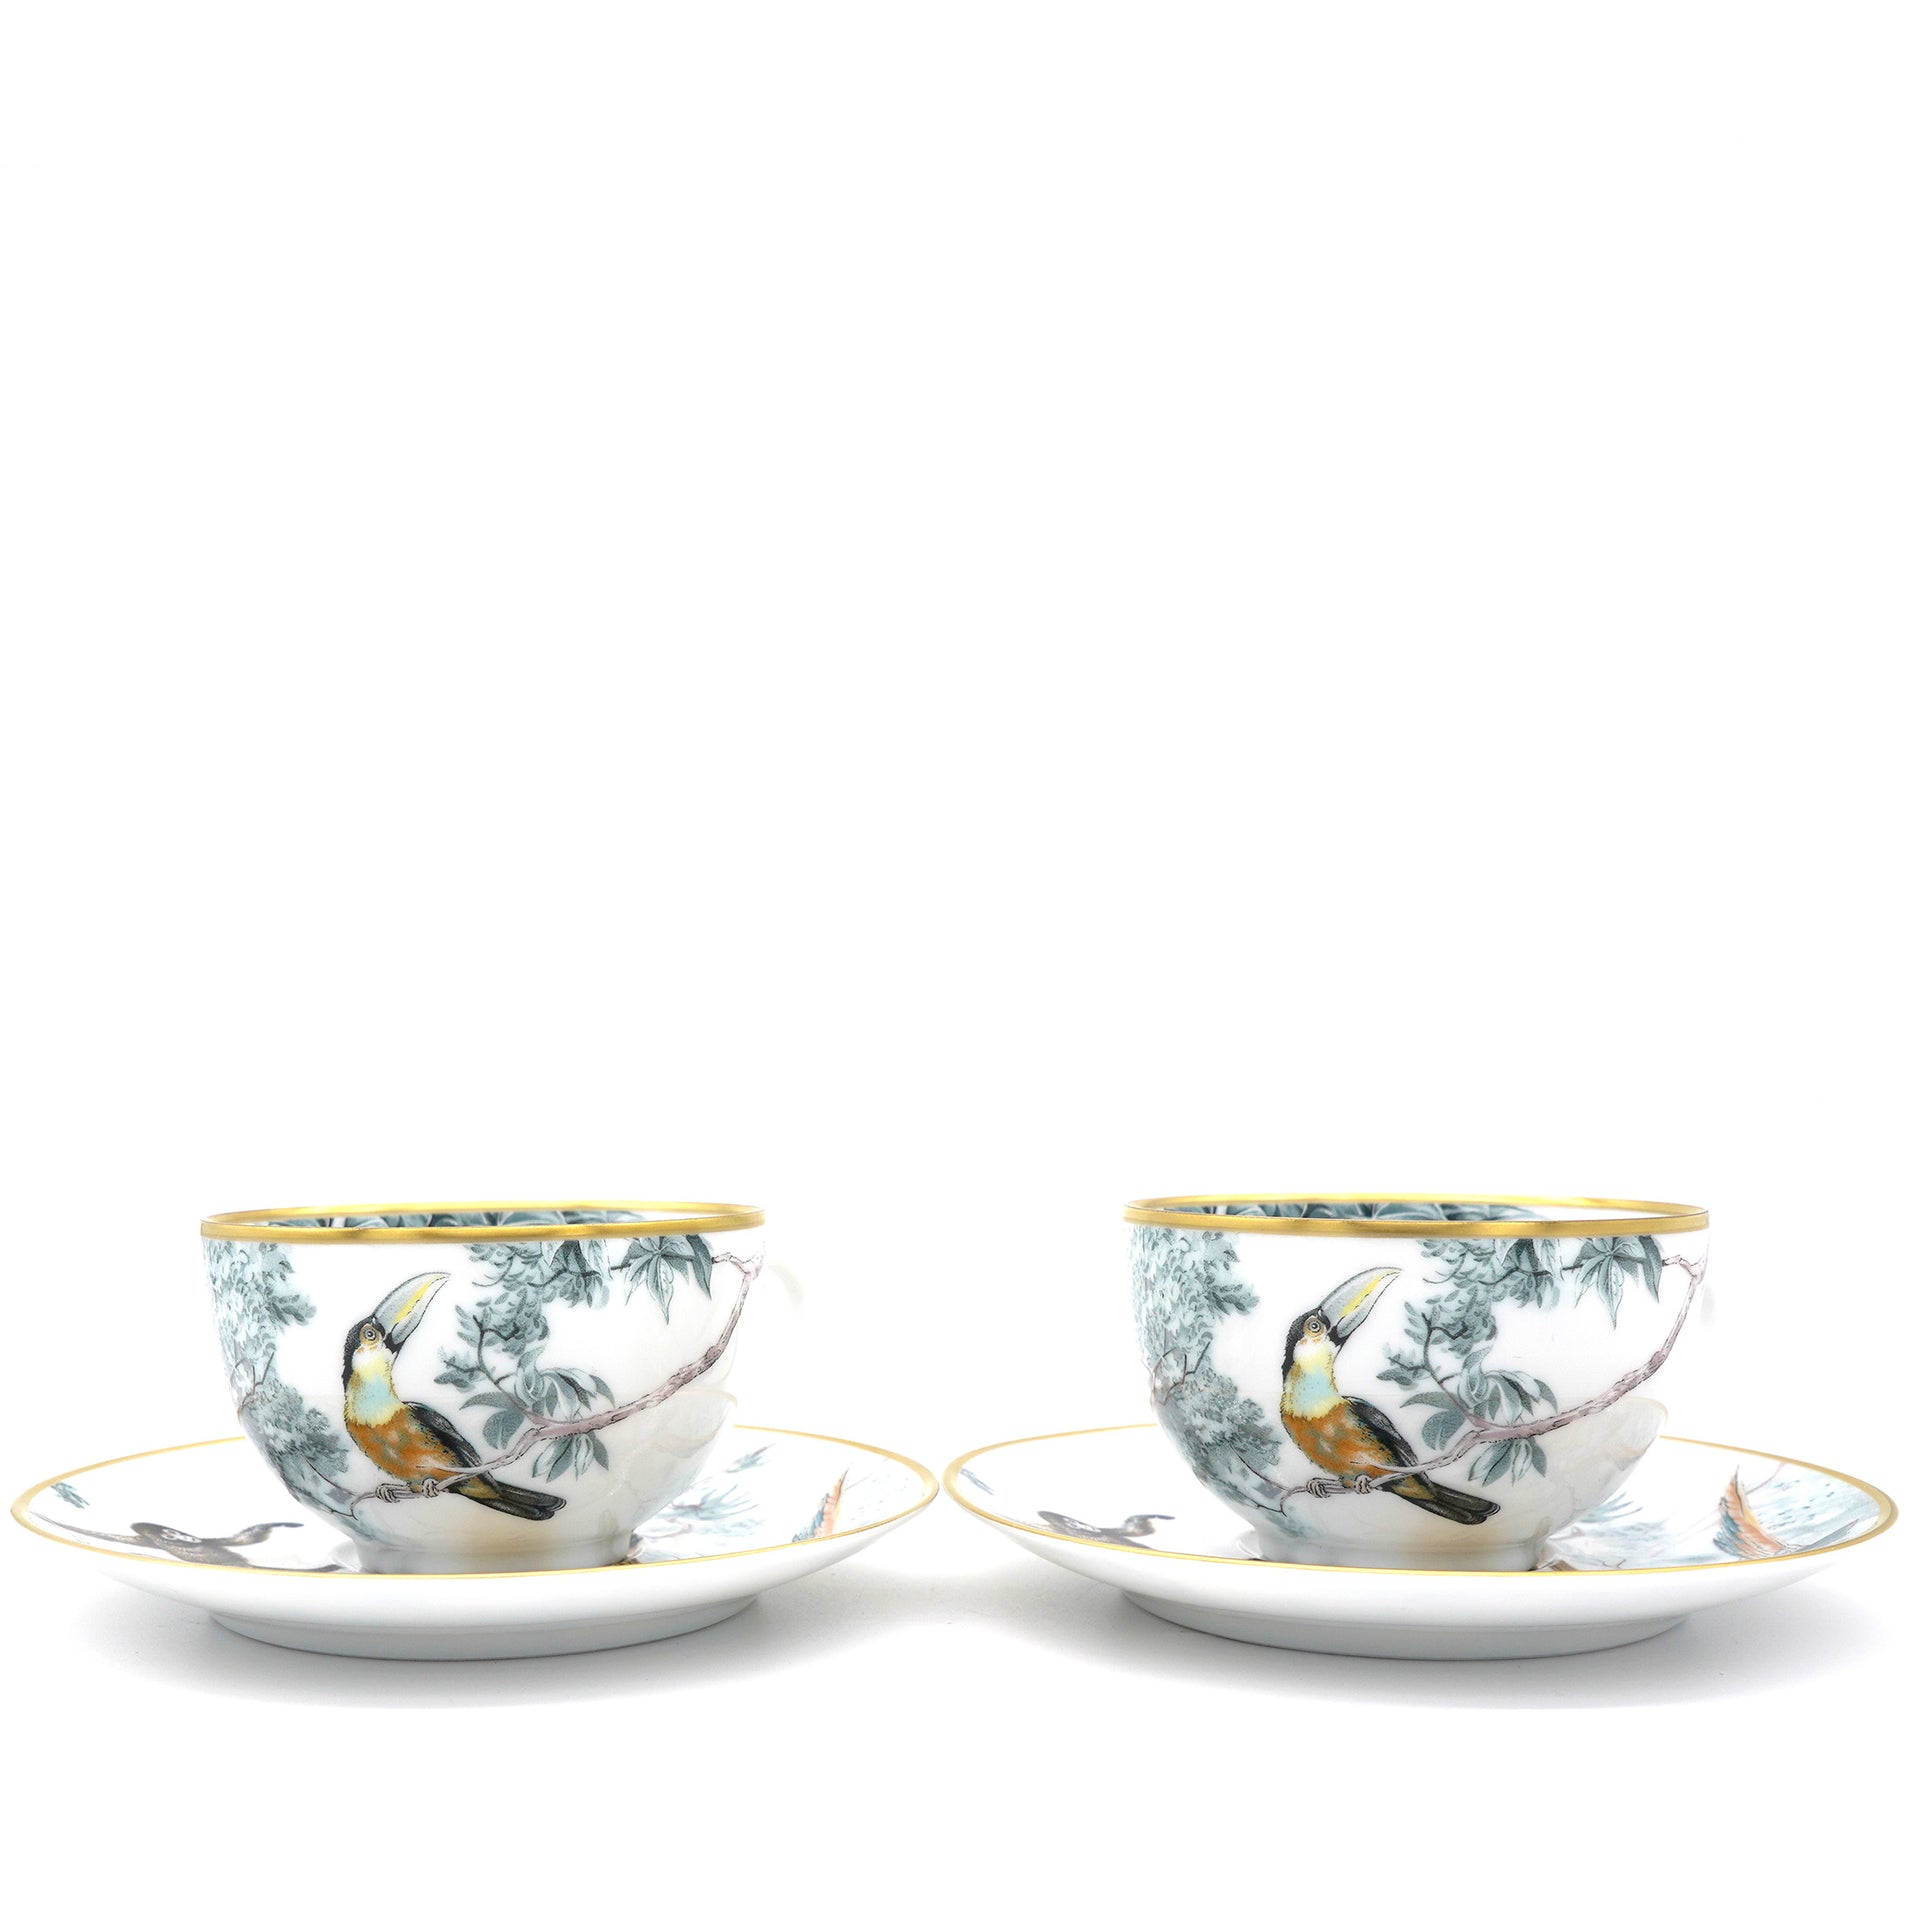 Carnets d'Equateur coffee cup and saucer